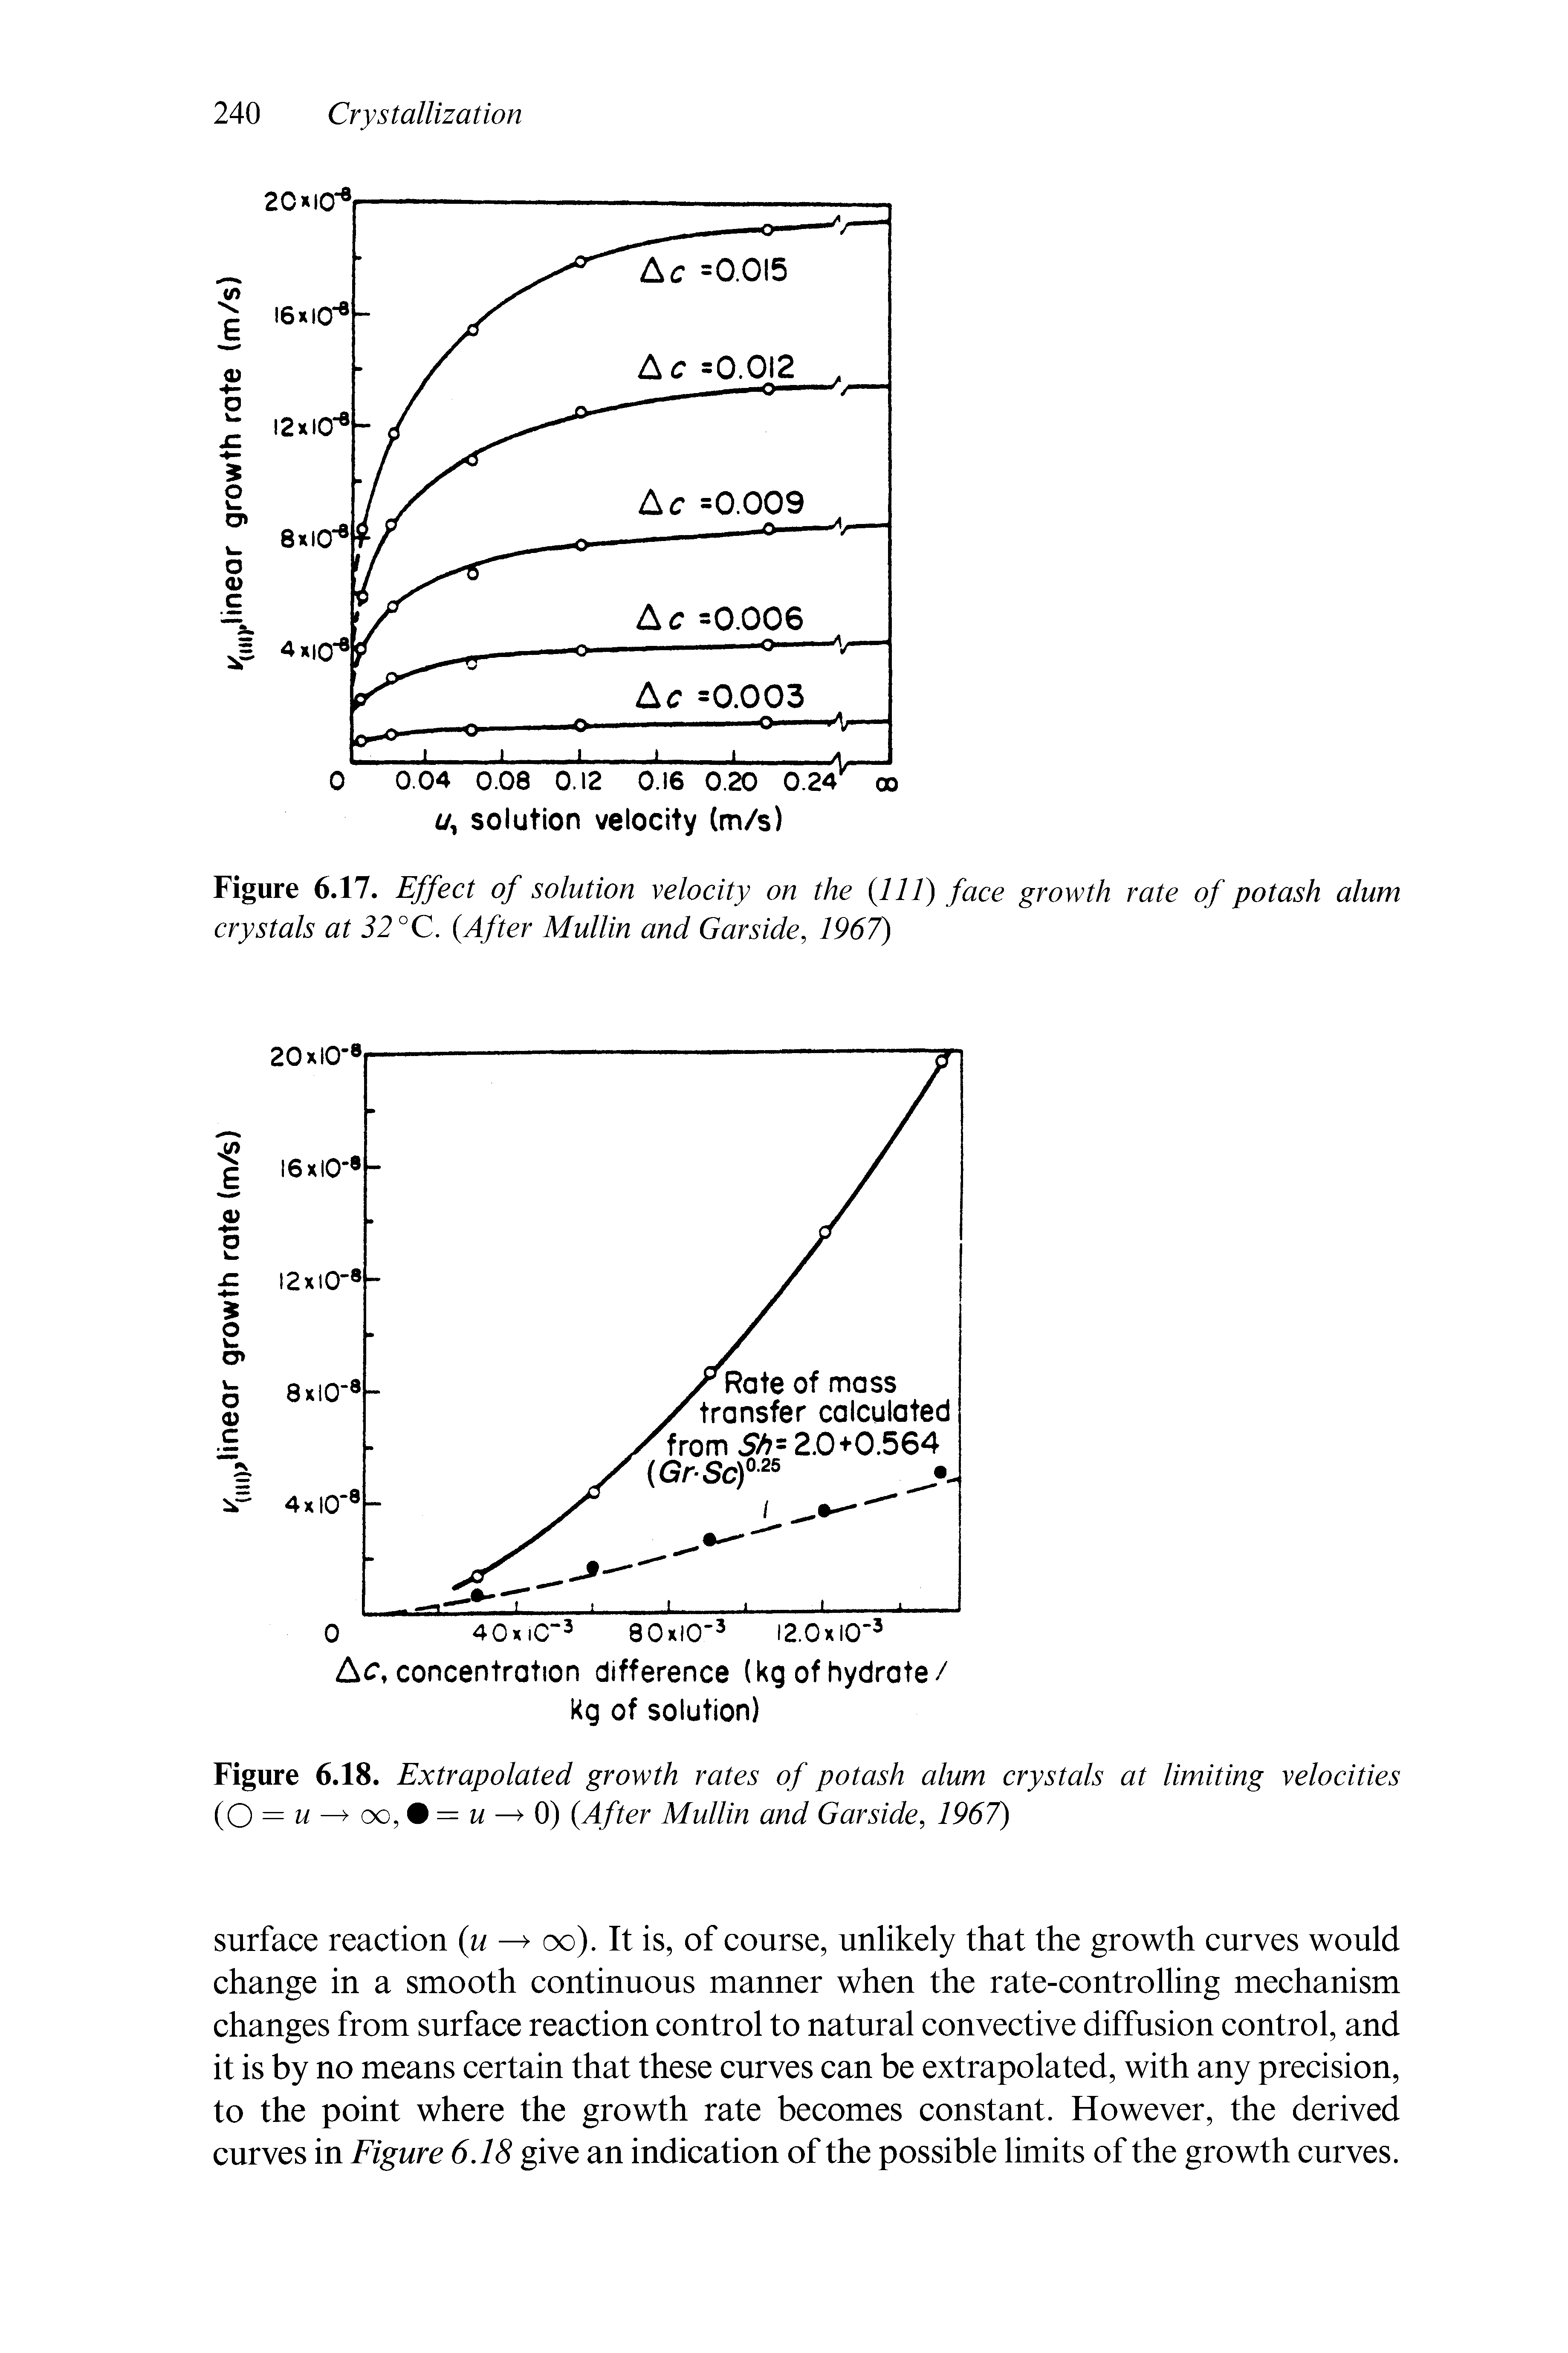 Figure 6.18. Extrapolated growth rates of potash alum crystals at limiting velocities 0 = u cxD, =w 0) After Mullin and Gar side, 1967)...